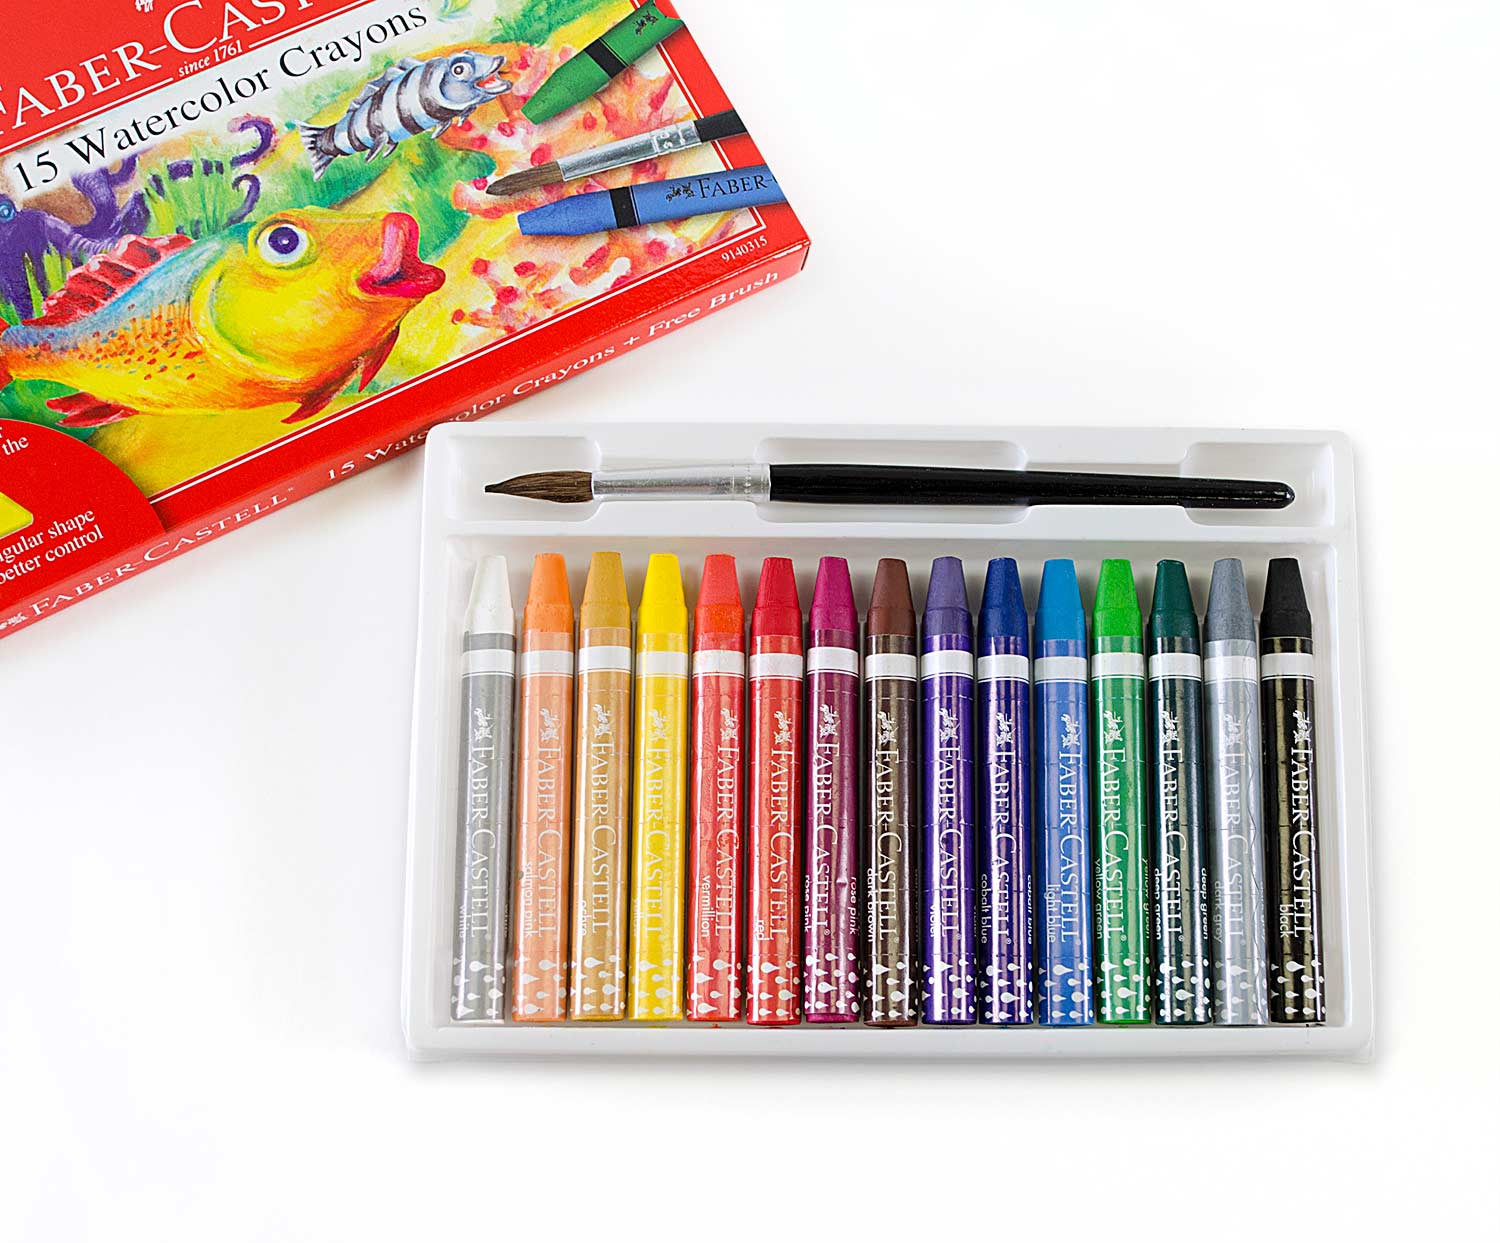 9140315 15CT WTRCLR CRAYONS - A Child's Delight